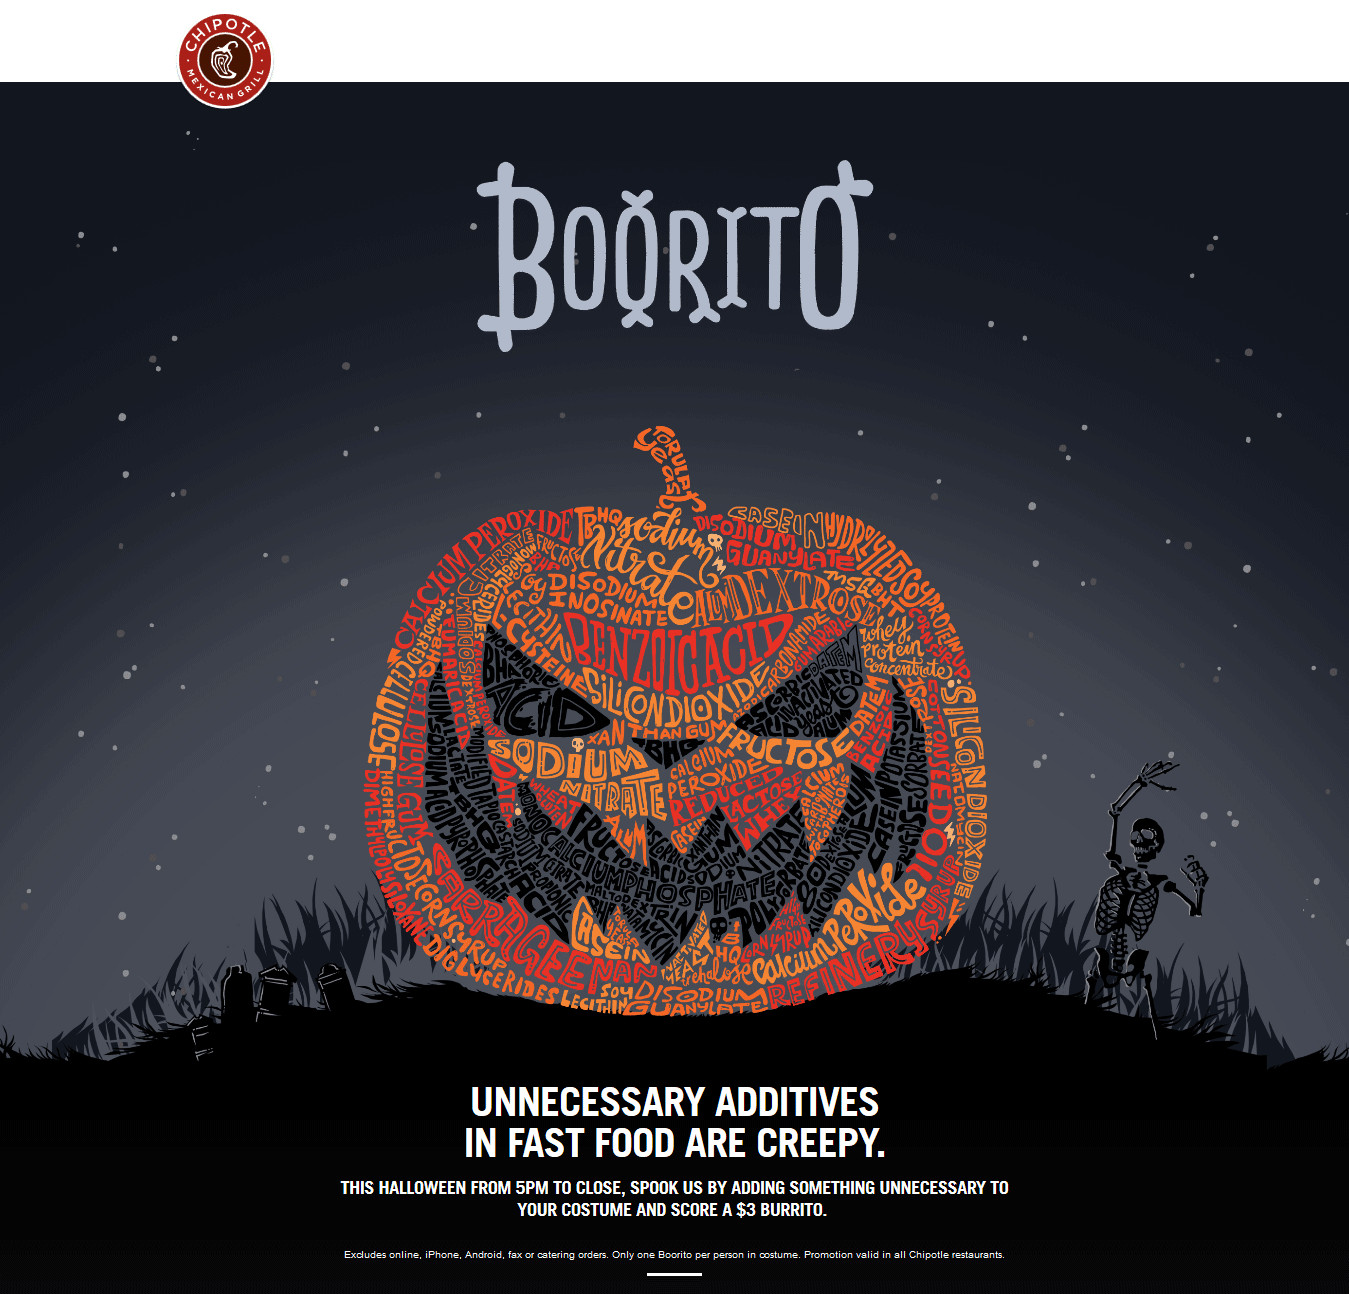 $3 Burritos At Chipotle On Halloween
 Chipotle Coupons $3 burritos in costume Halloween at